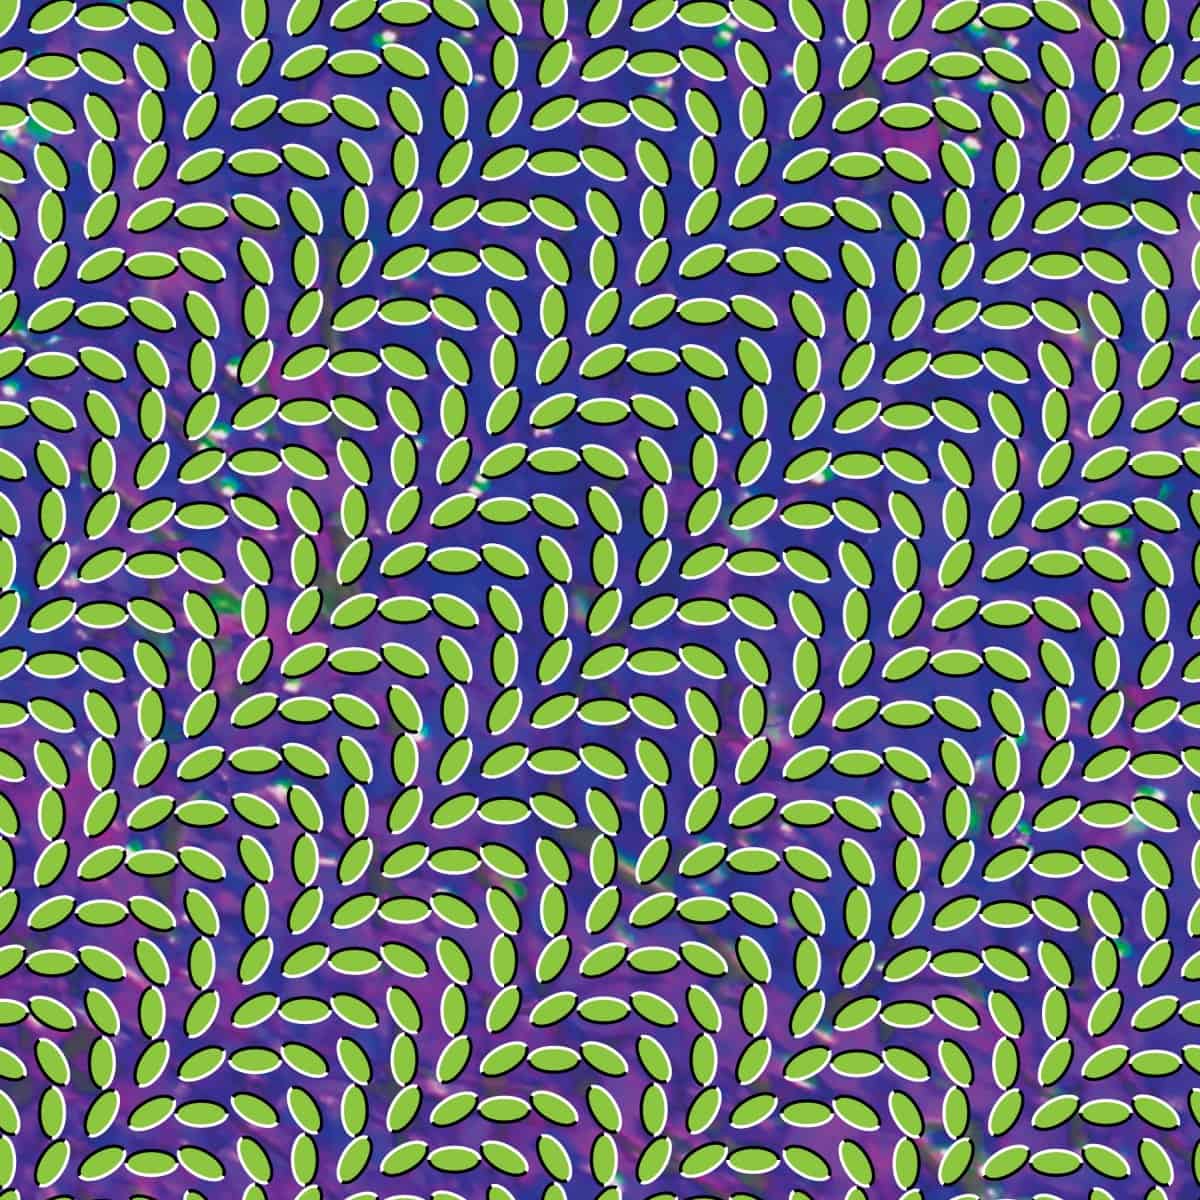 NORMAN’S ALL-TIME PICKS: ‘Merriweather Post Pavilion’ by Animal Collective Given a widespread digital release 15 years ago today, An Co’s eighth LP heard the psychedelia group lean into layered electronics and sample-laden surreal pop. normanrecords.com/promos/187